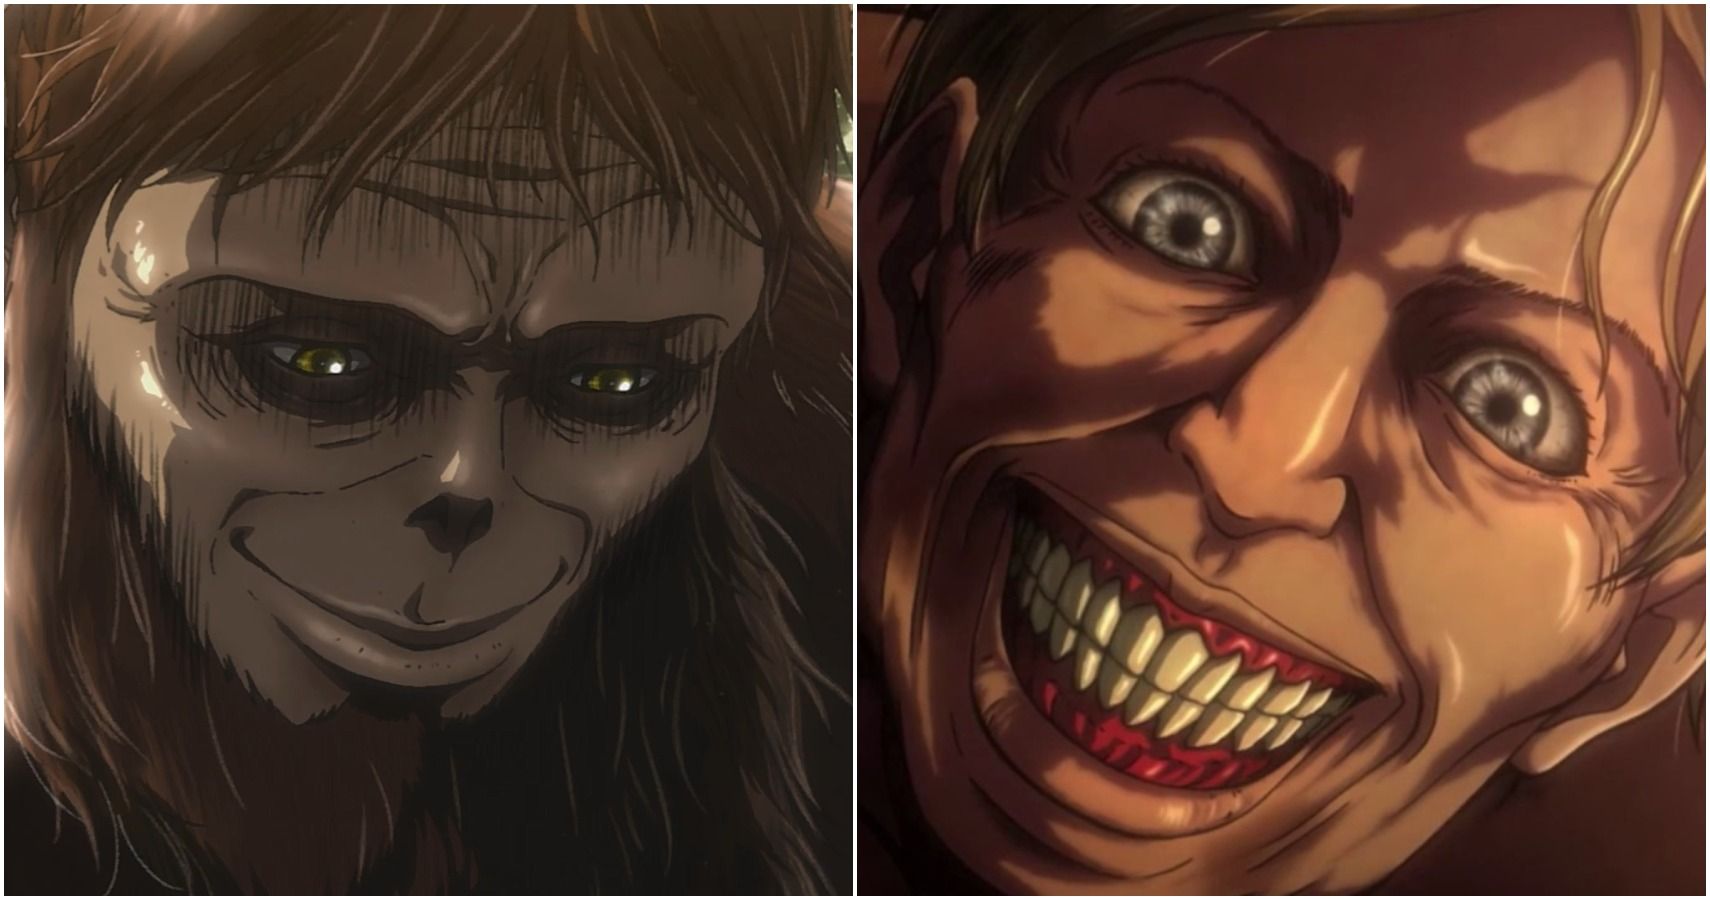 Attack On Titan The 10 Creepiest Titans In The Show So Far Cbr Takes one episode to kill after breaking quarter top of the wall. attack on titan the 10 creepiest